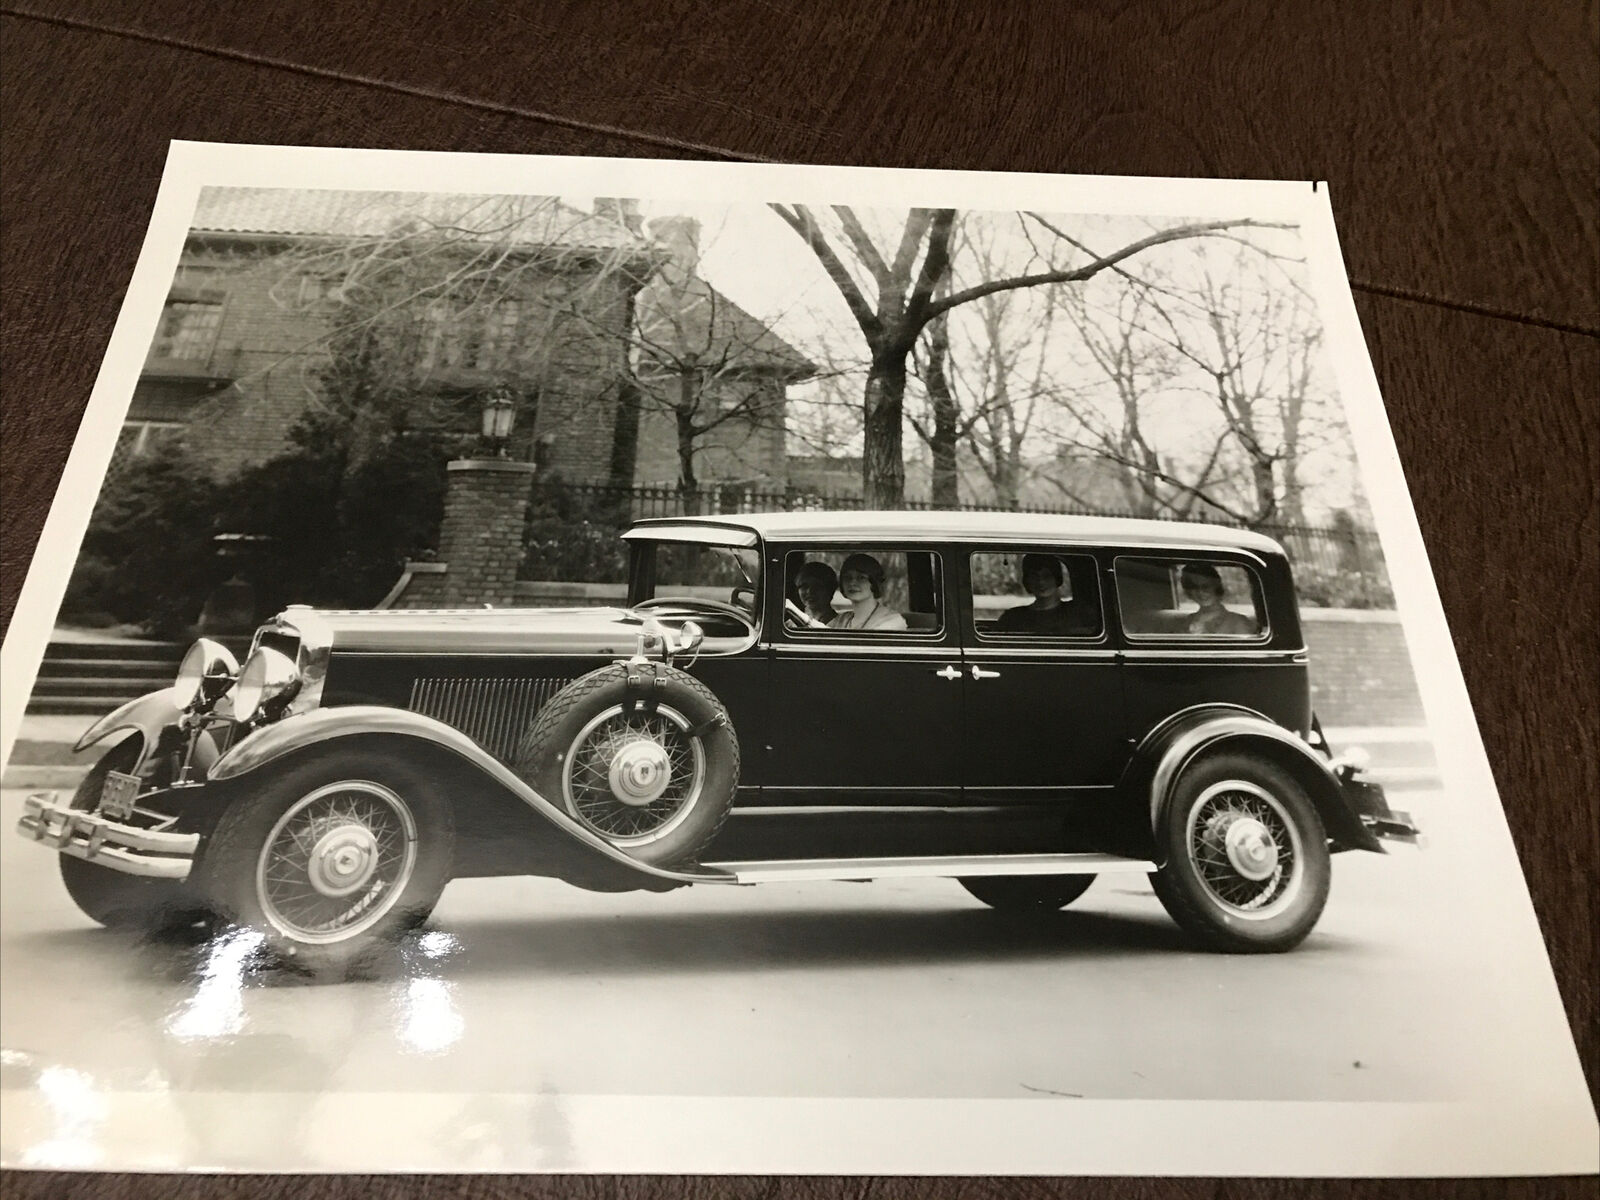 1931 Studebaker President Eight With Four Flapper Girls 35mm Photograph